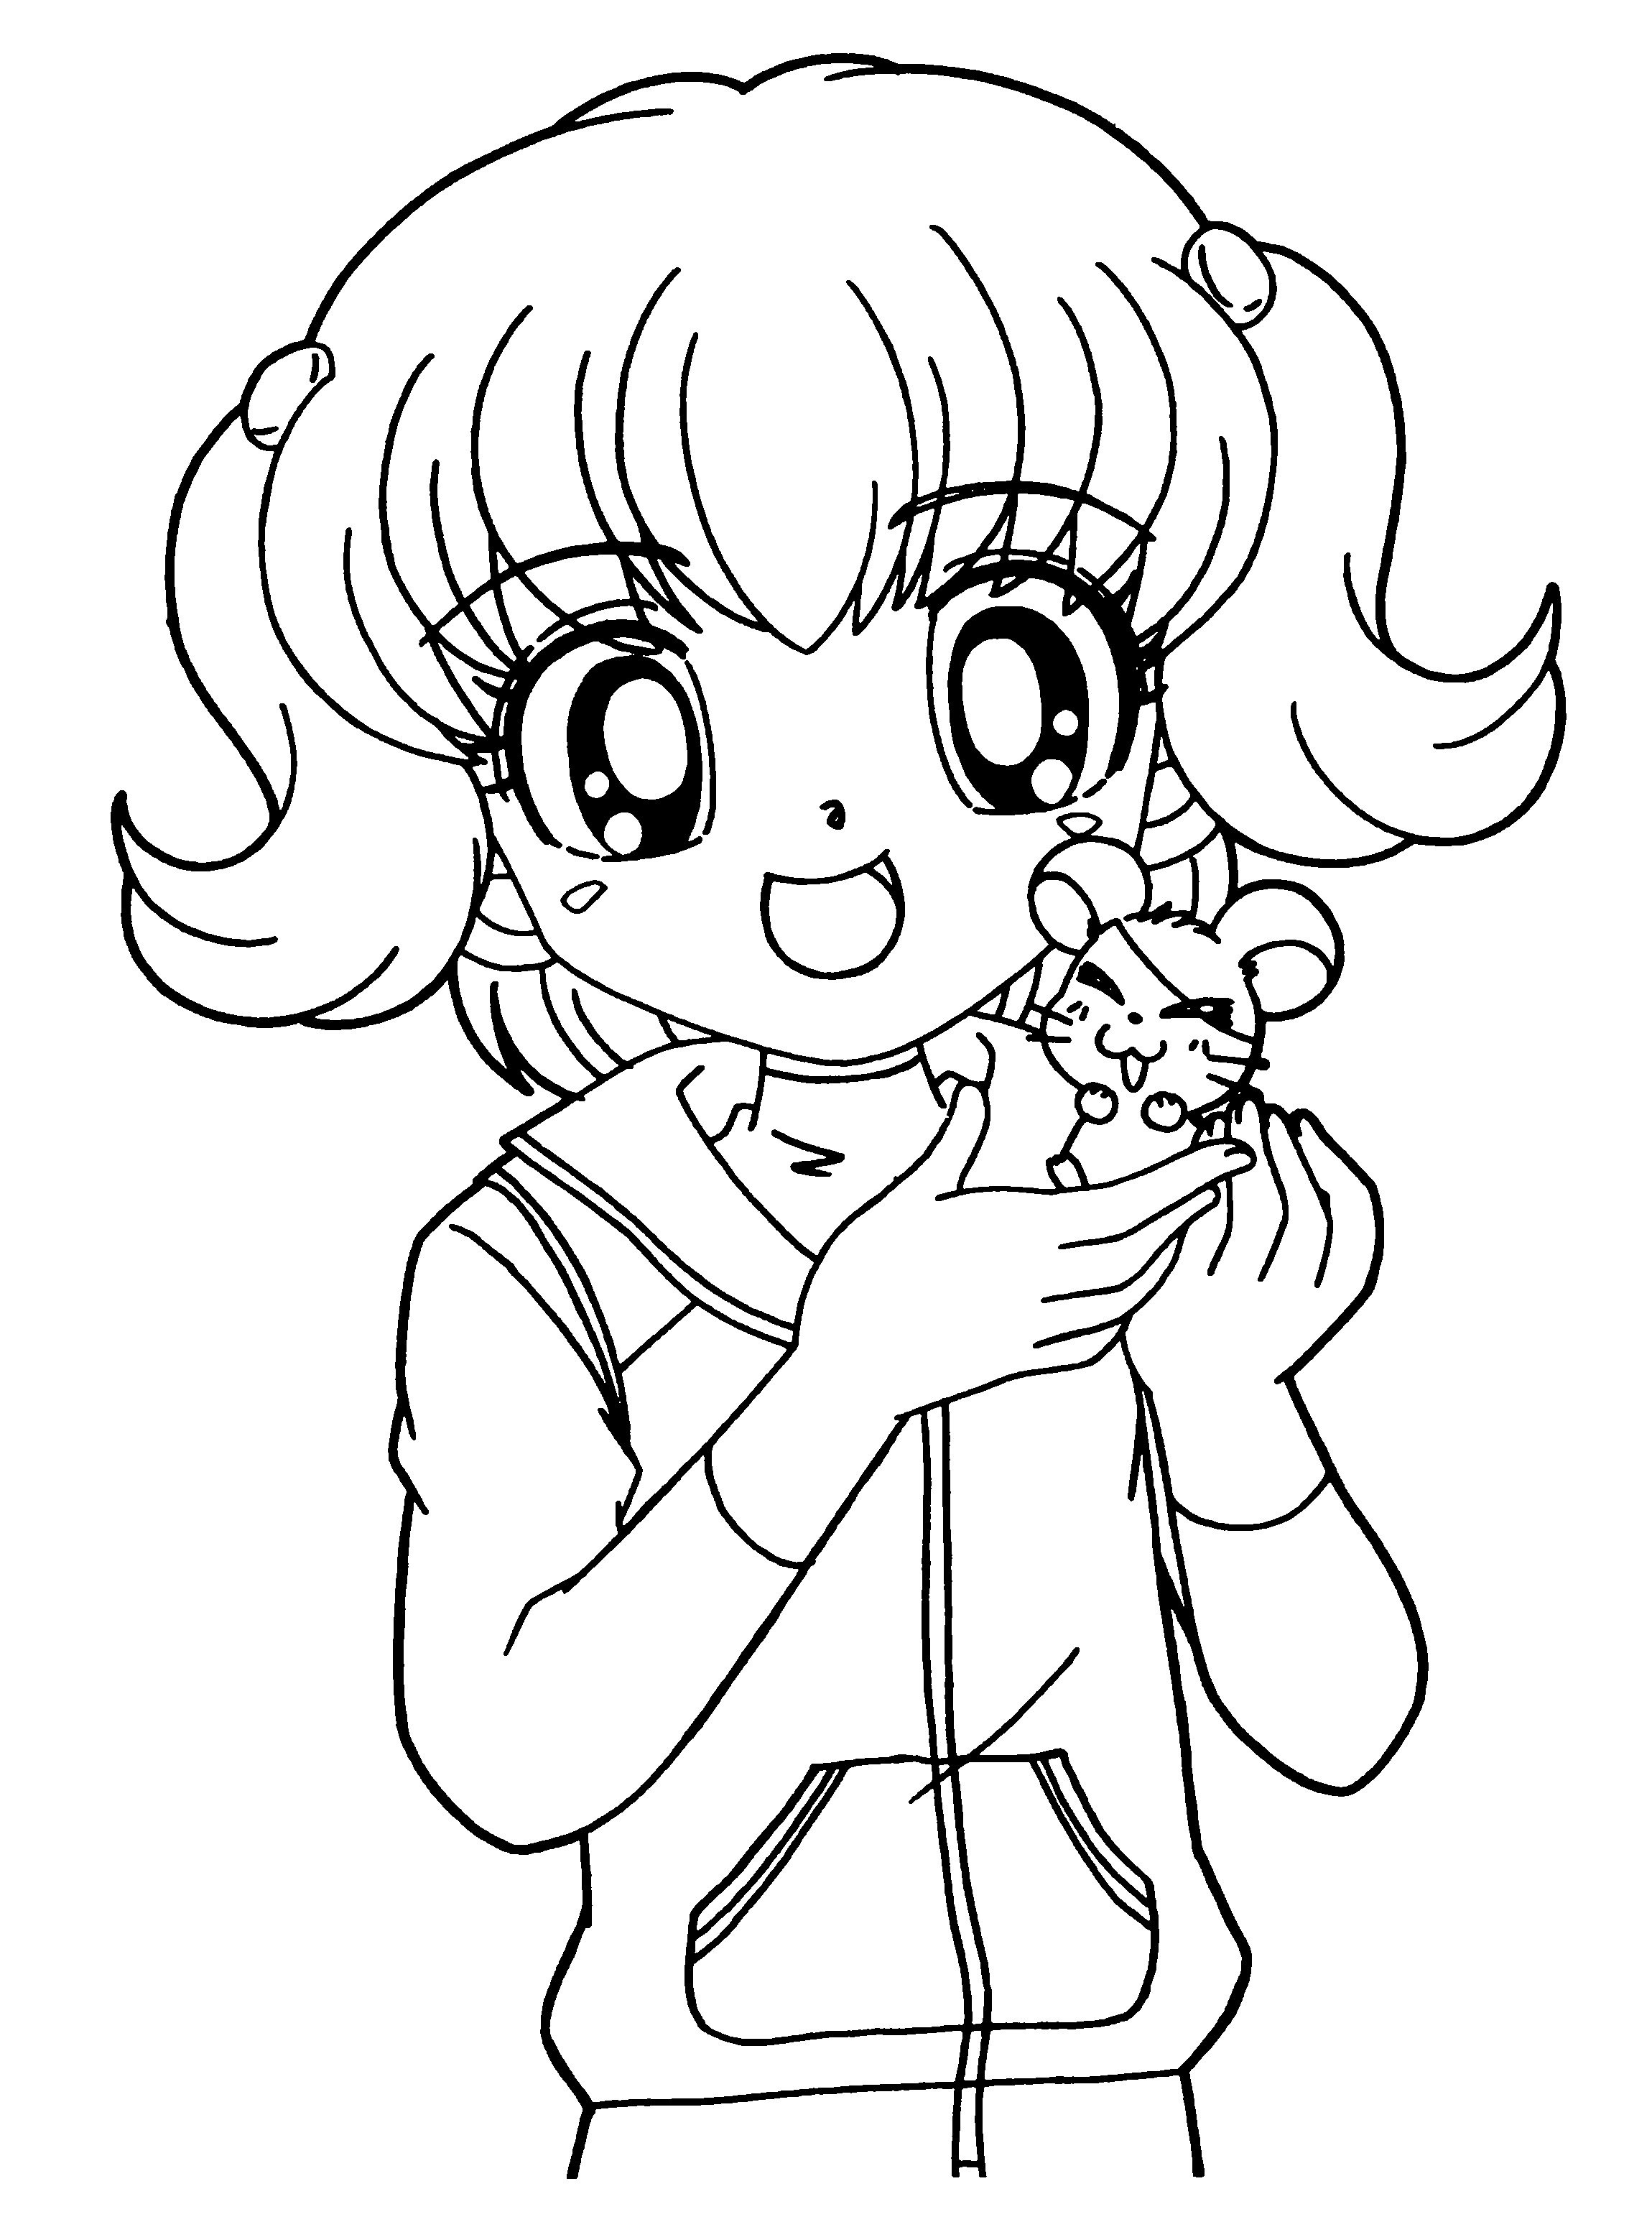 Anime Girl Coloring Pages To Print
 Anime Coloring Pages Best Coloring Pages For Kids